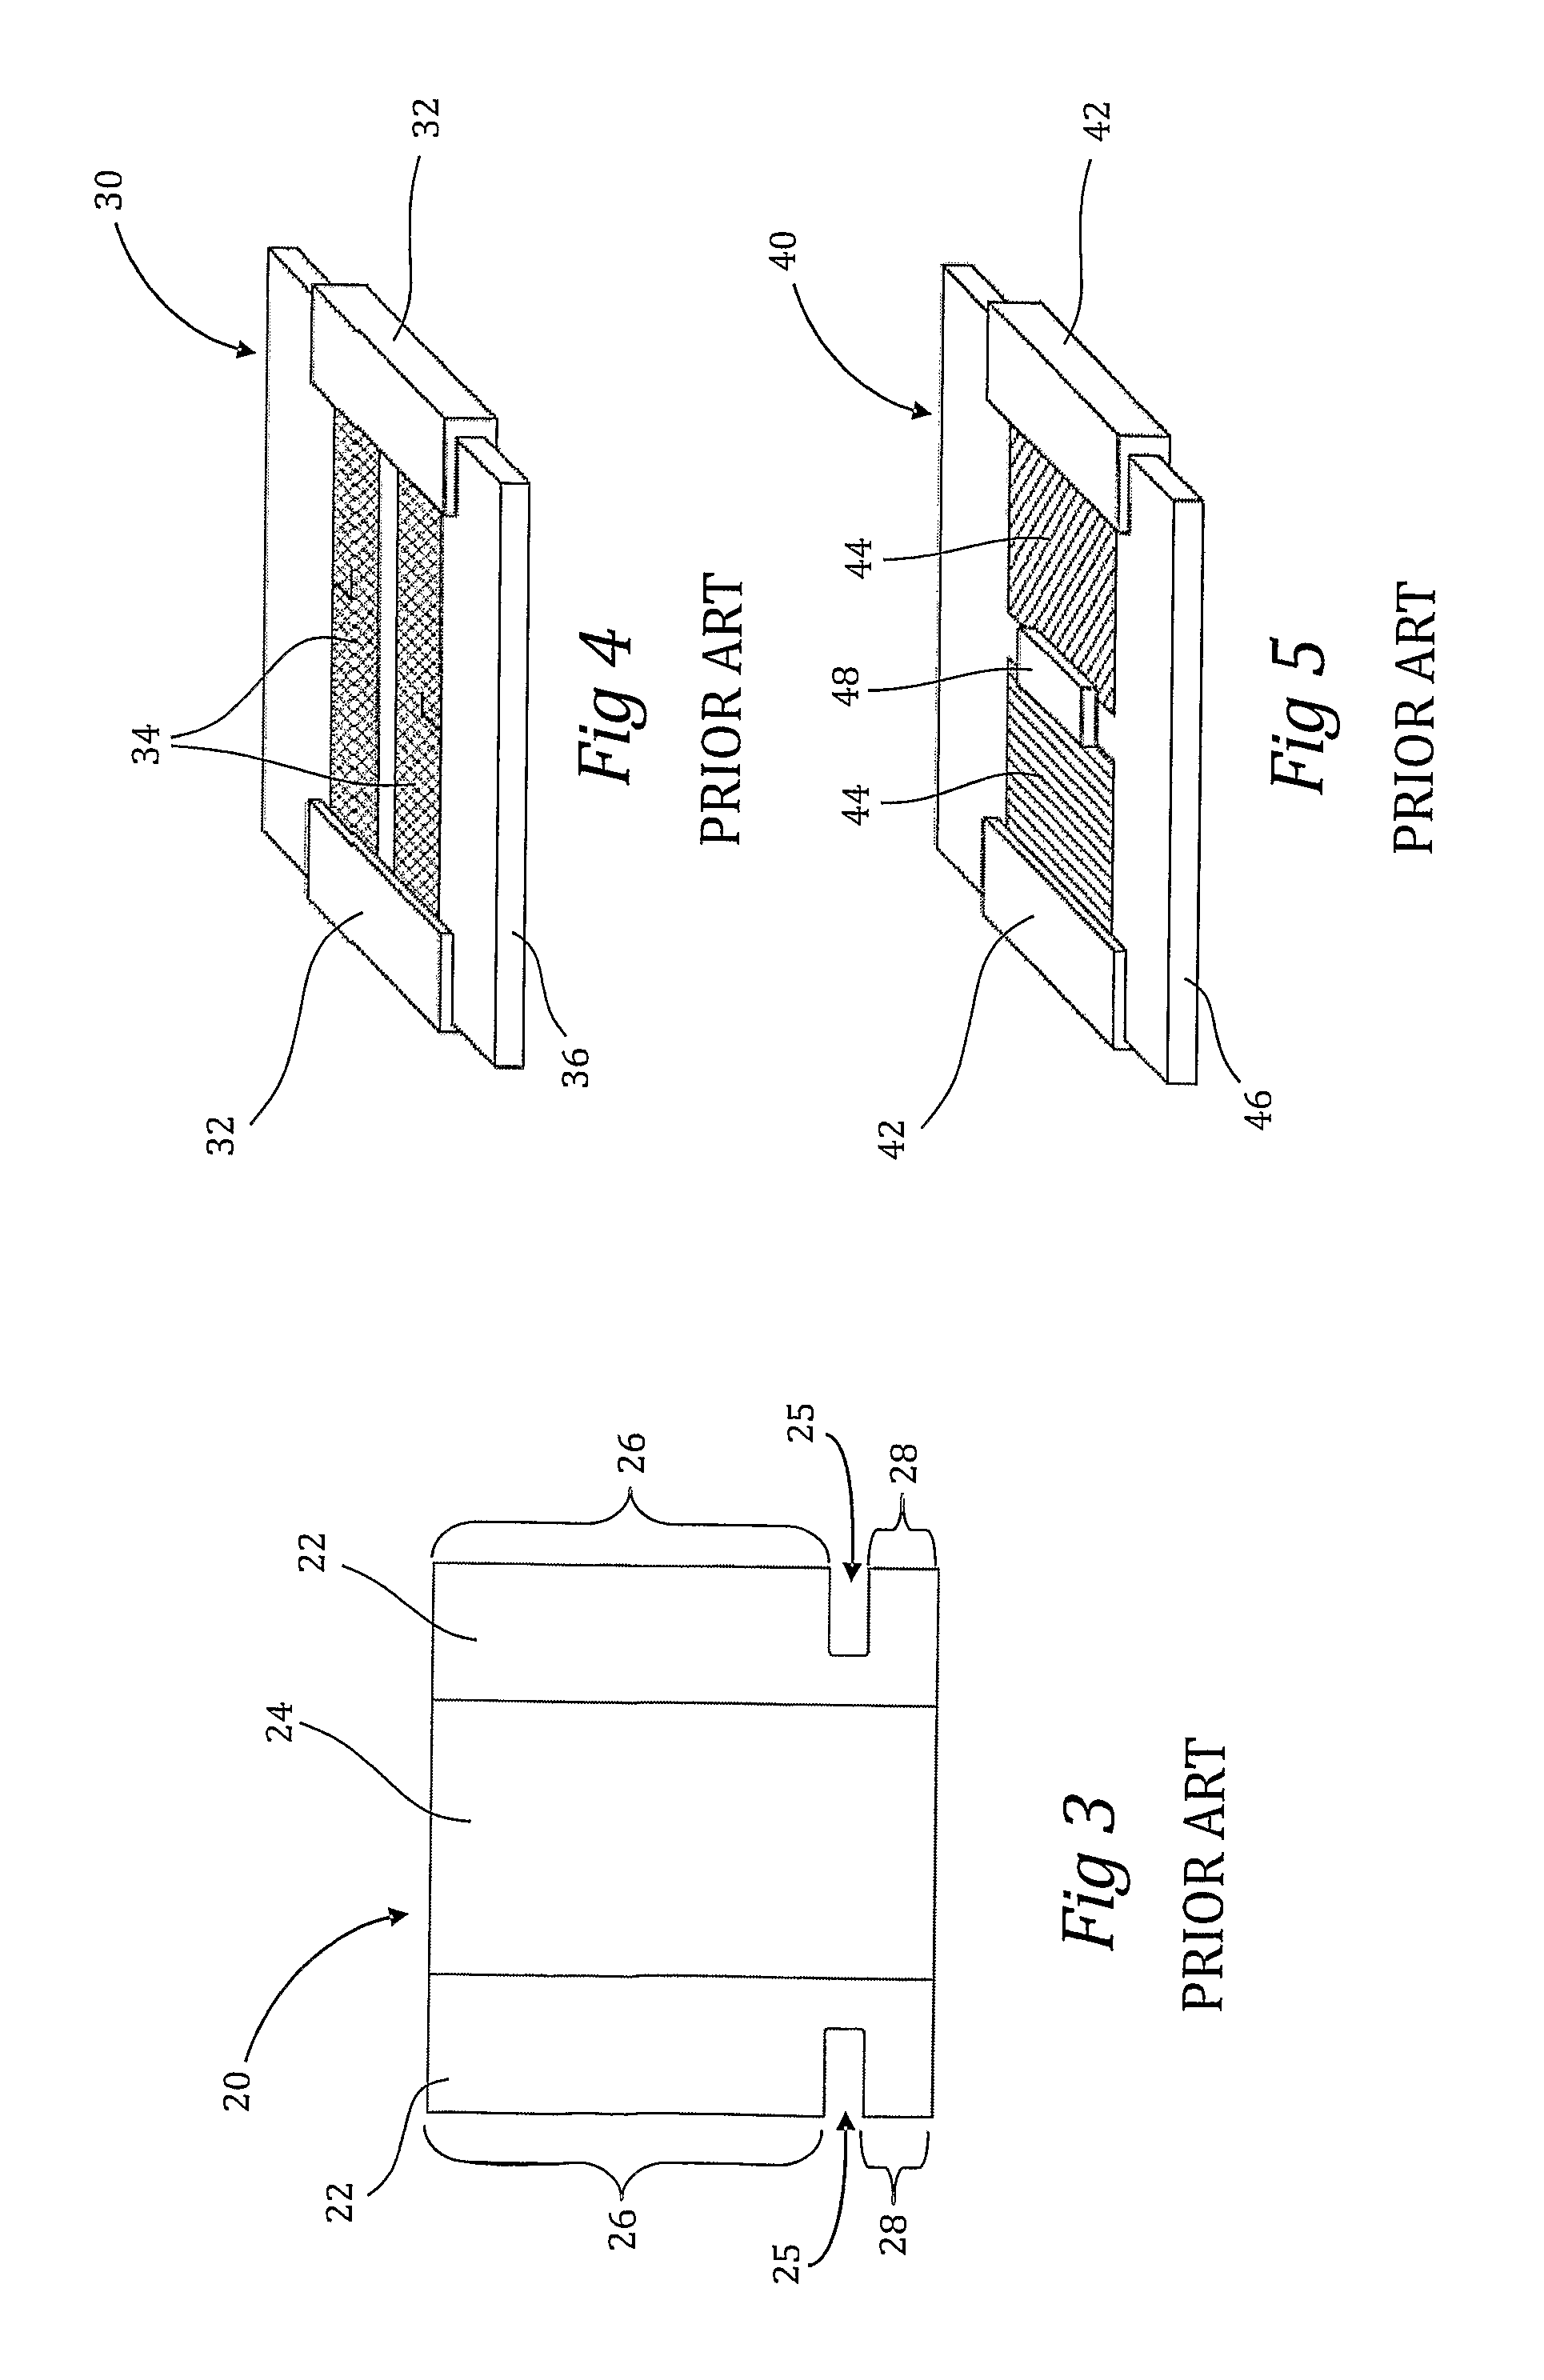 Four-terminal resistor with four resistors and adjustable temperature coefficient of resistance